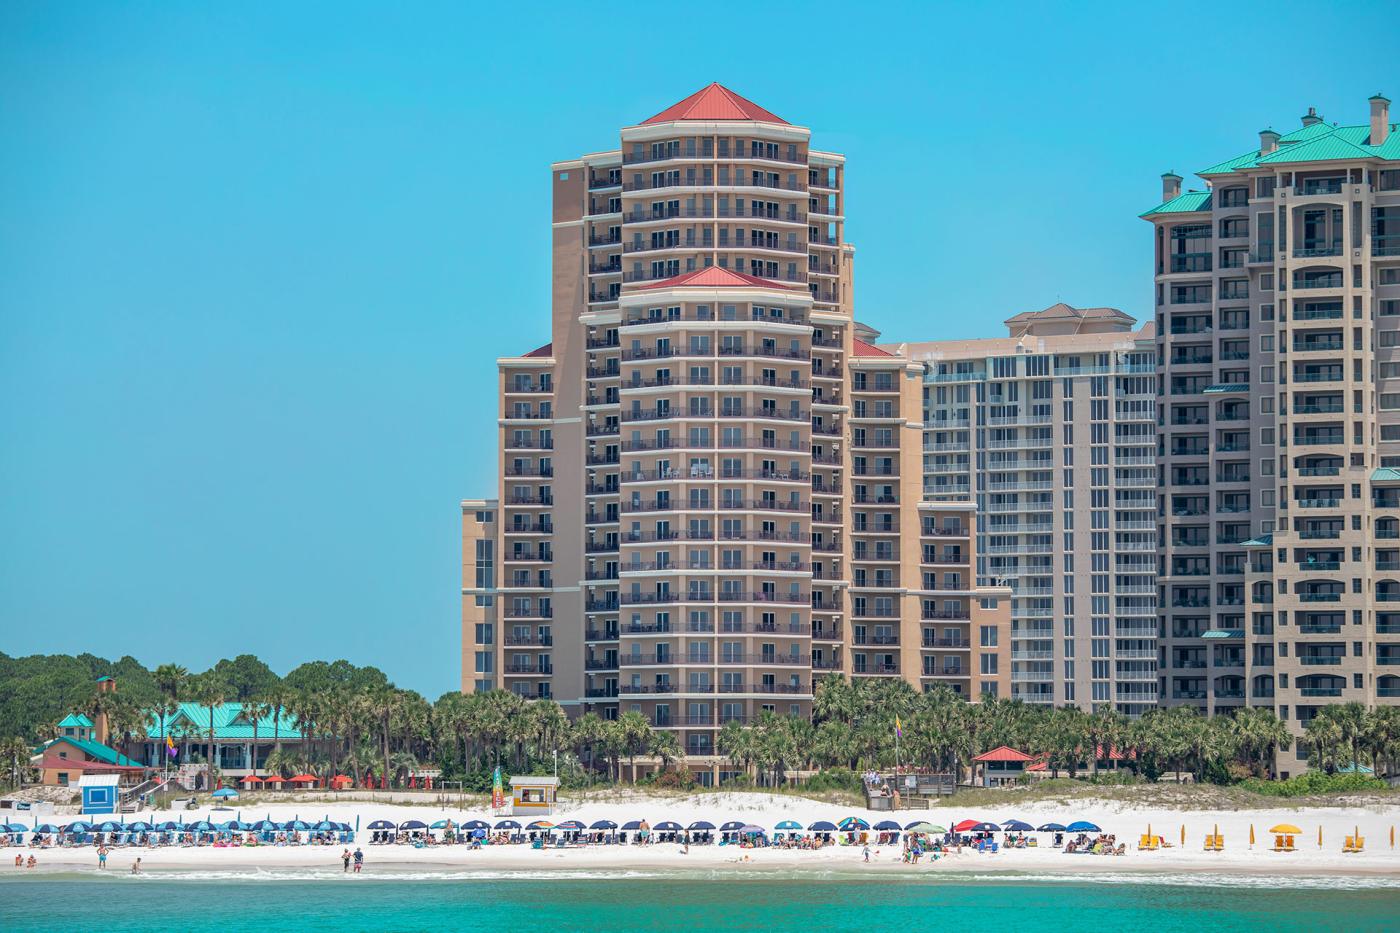 westwinds building as viewed from the beach